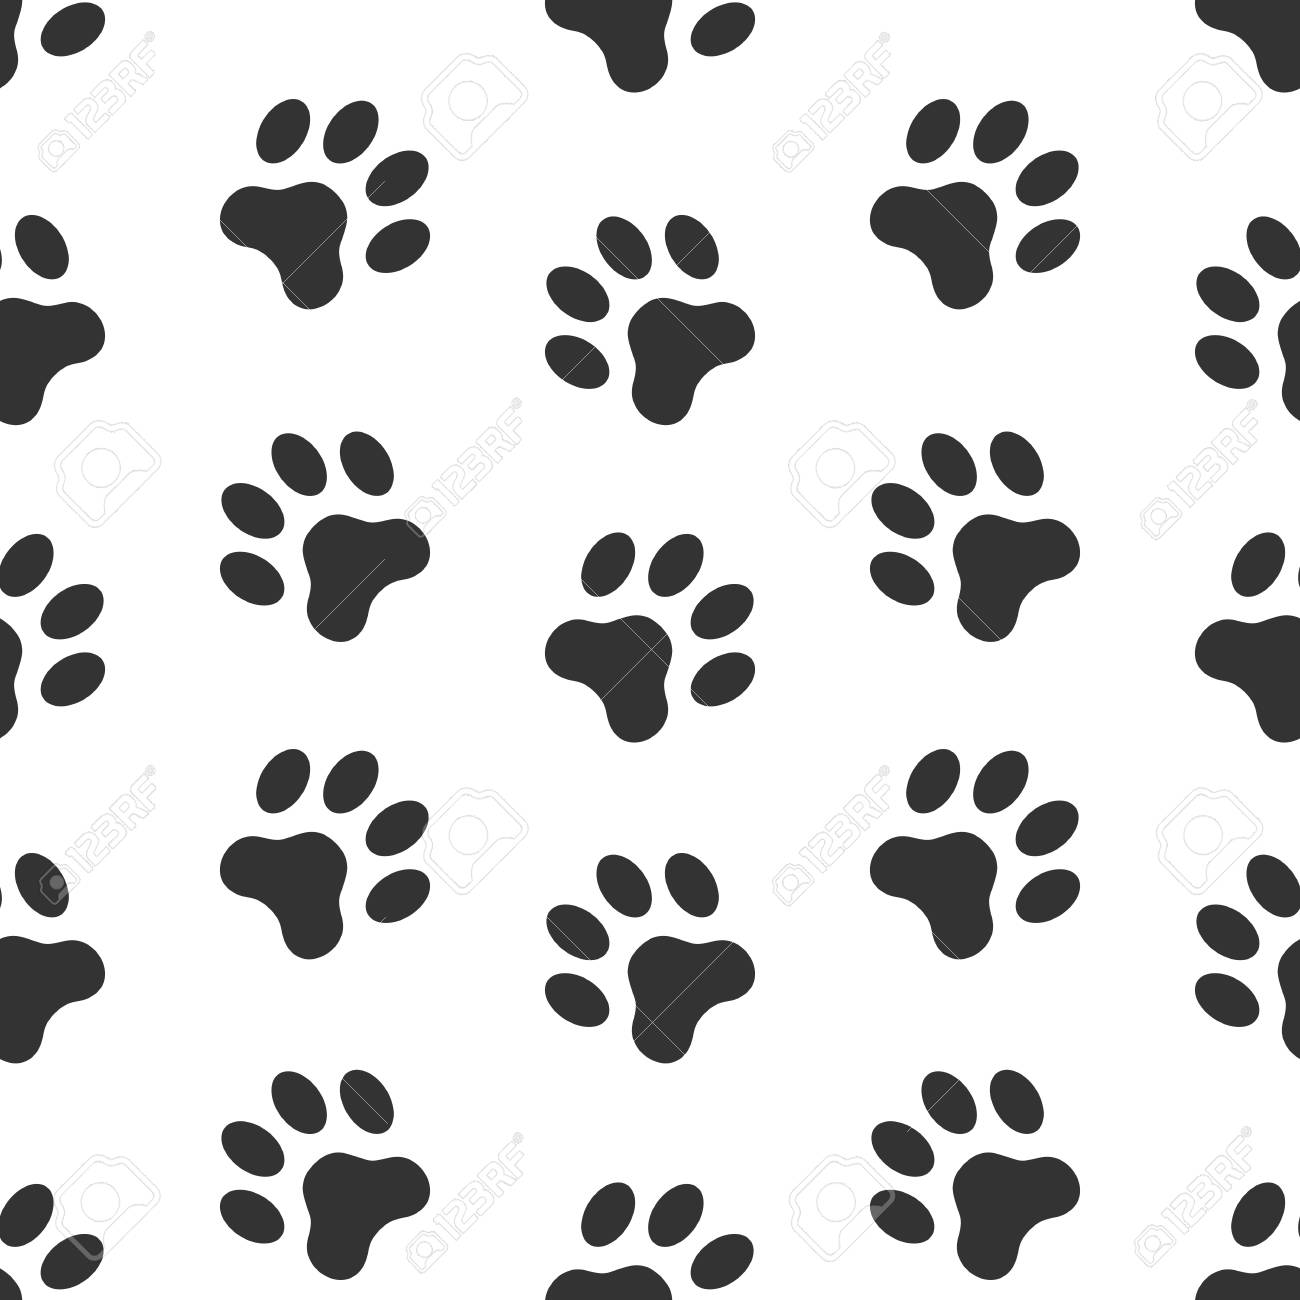 Dog Paw Track Prints Background Vector Seamless Pattern